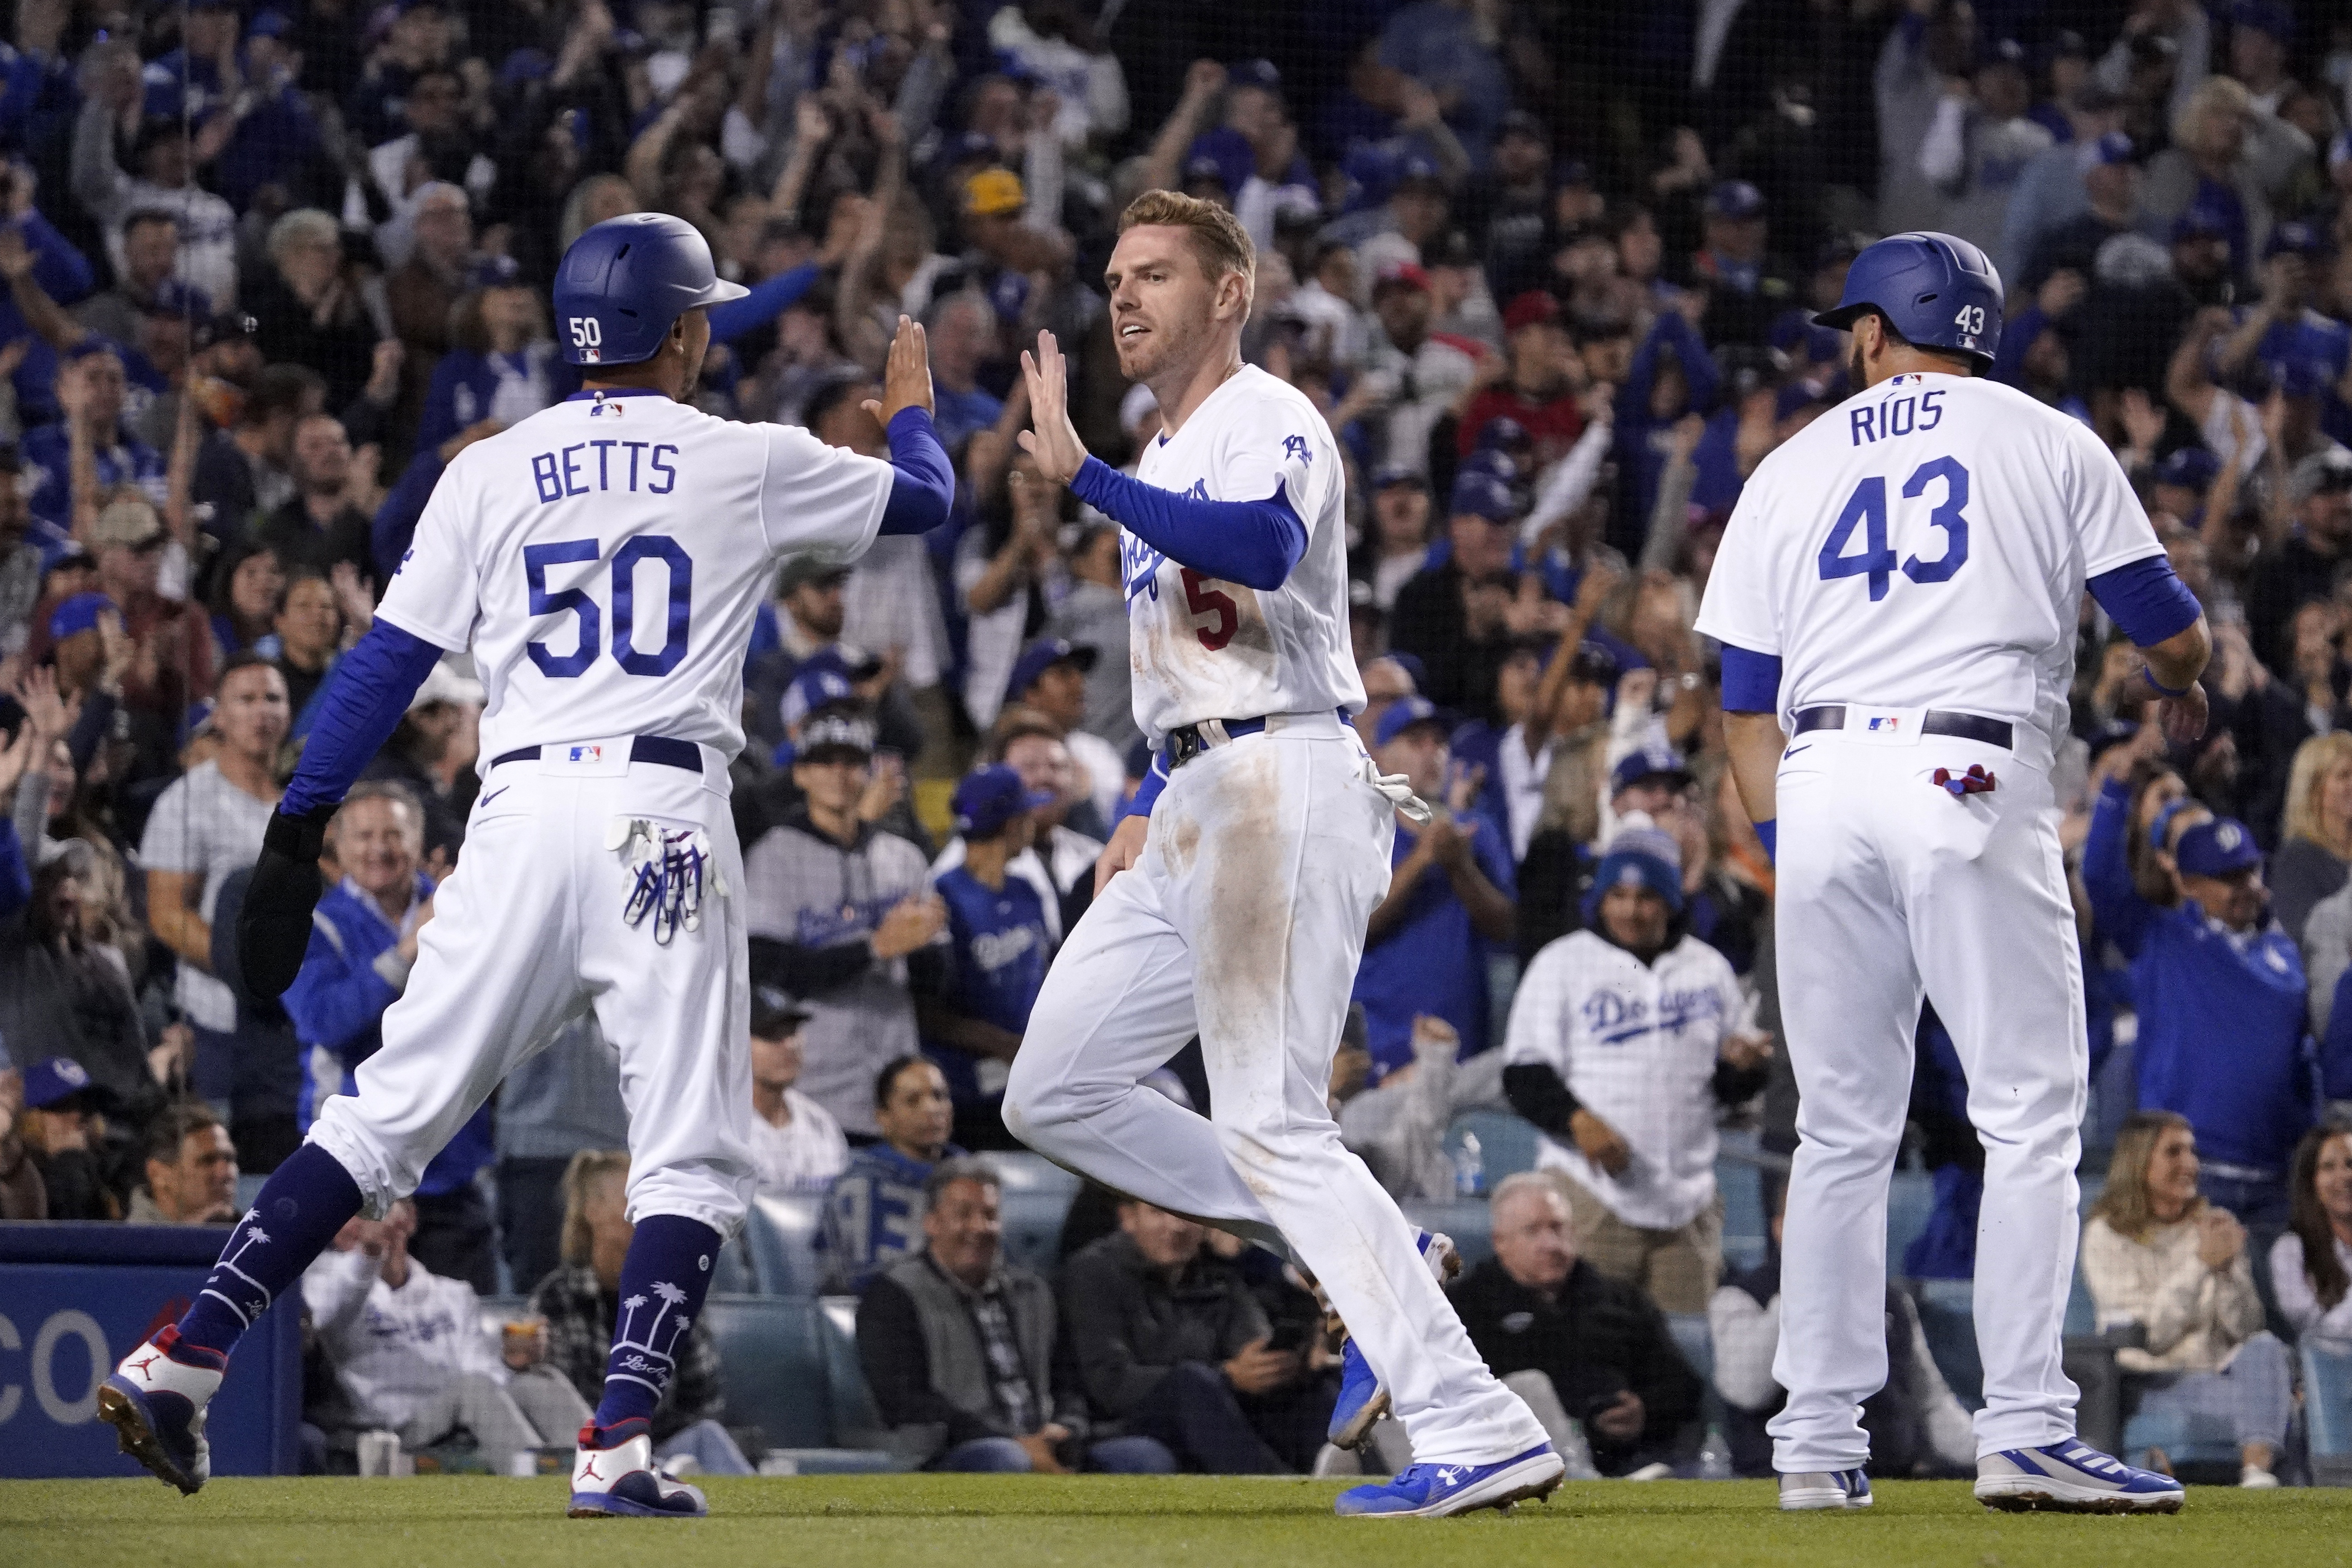 Freeman hits 1st HR for Dodgers in reunion win over Braves